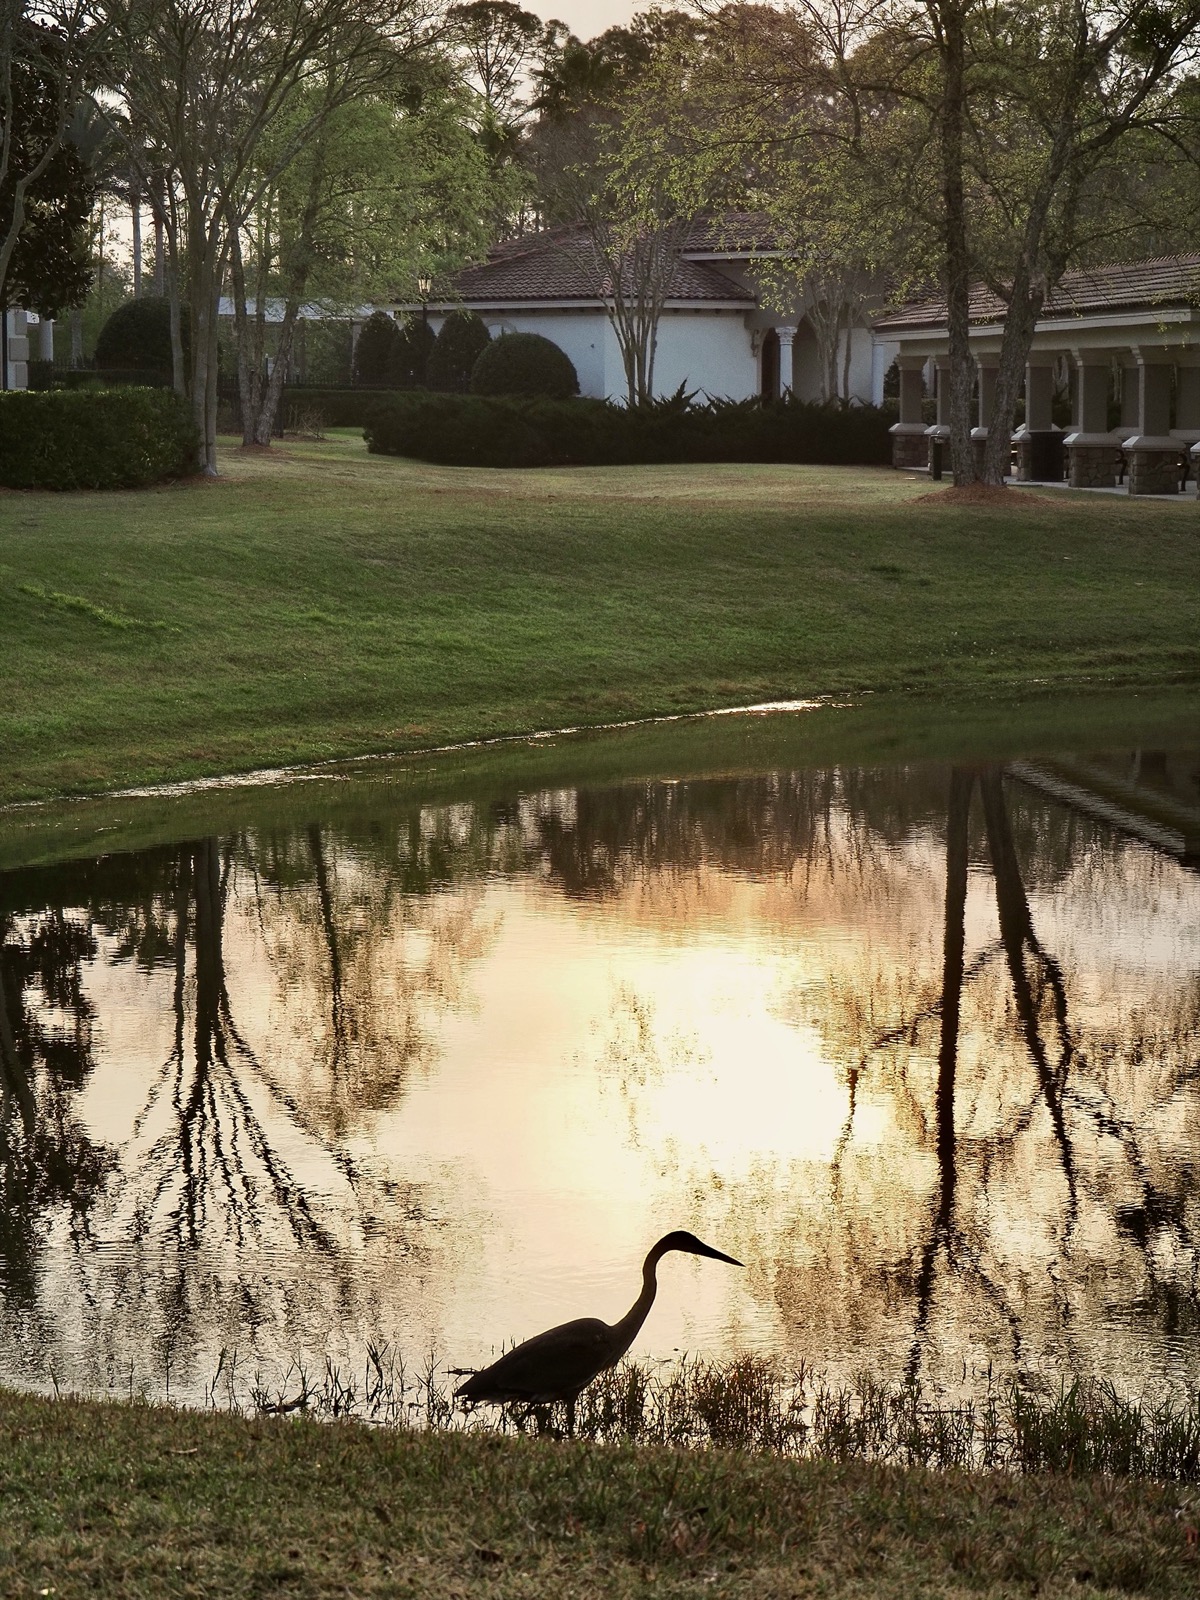 Great blue heron silhouetted against the morning sun's reflection in a retention pond